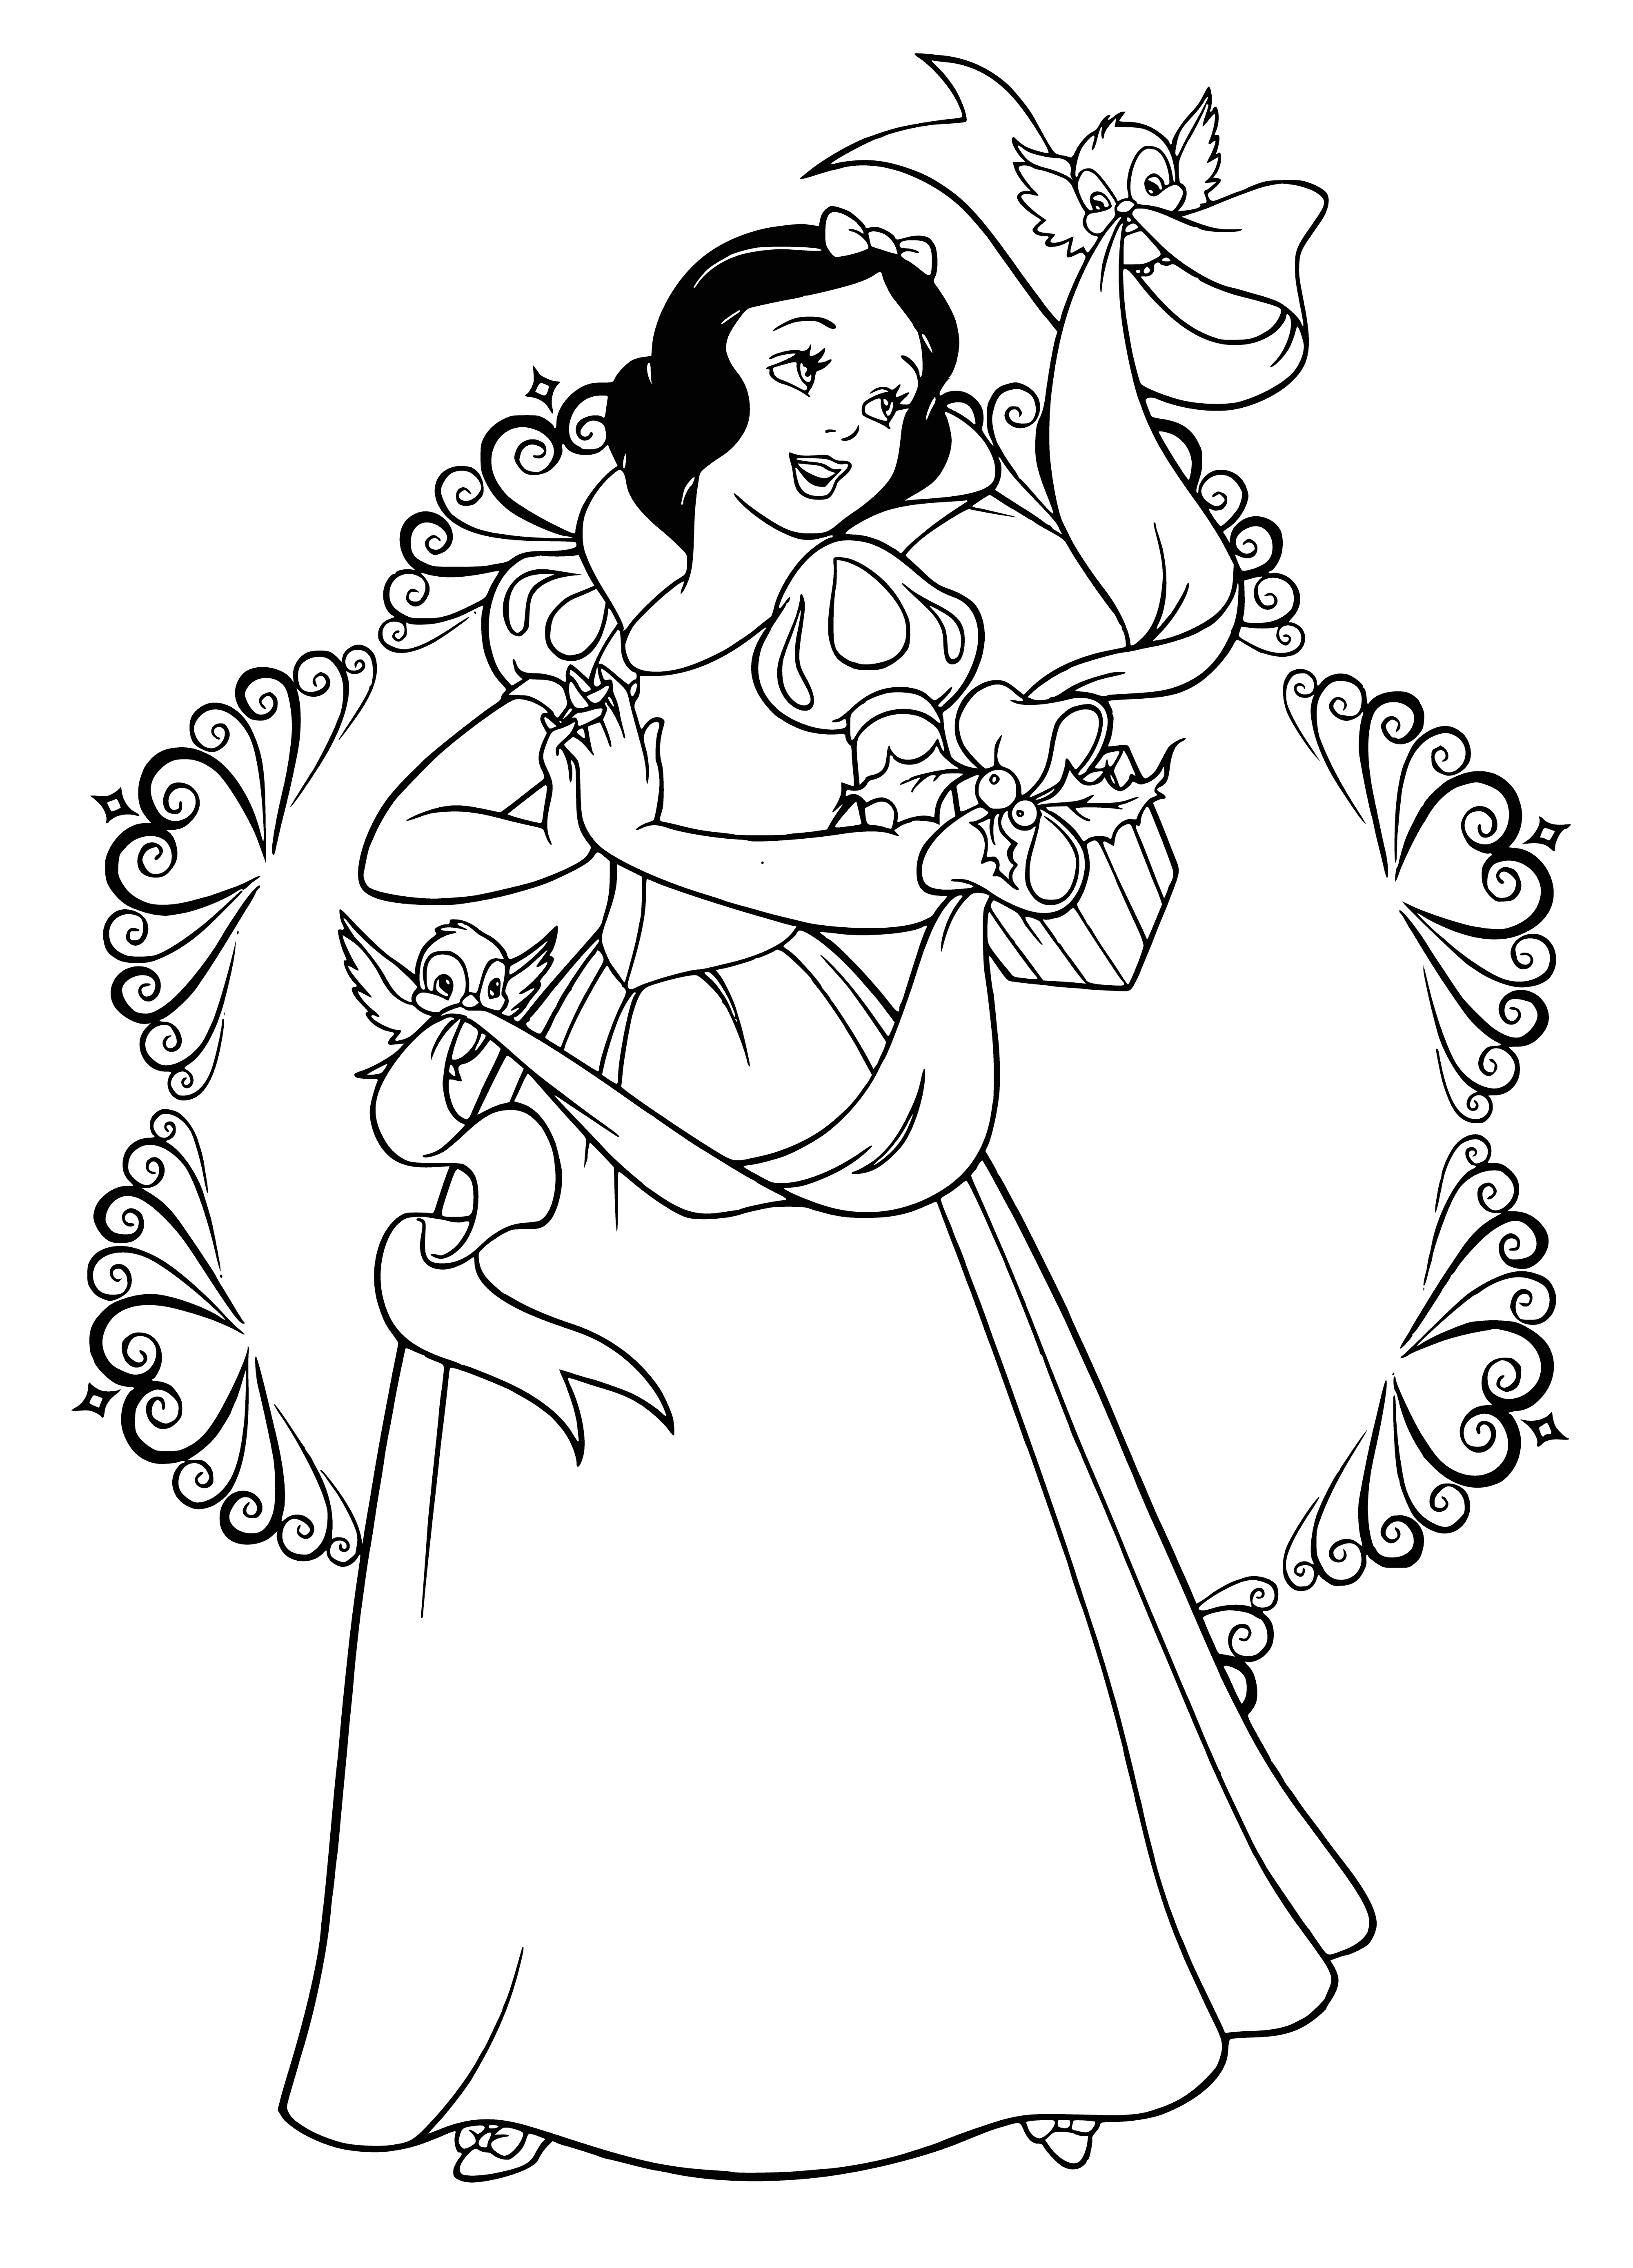 Snow White with New Year's Gift coloring page